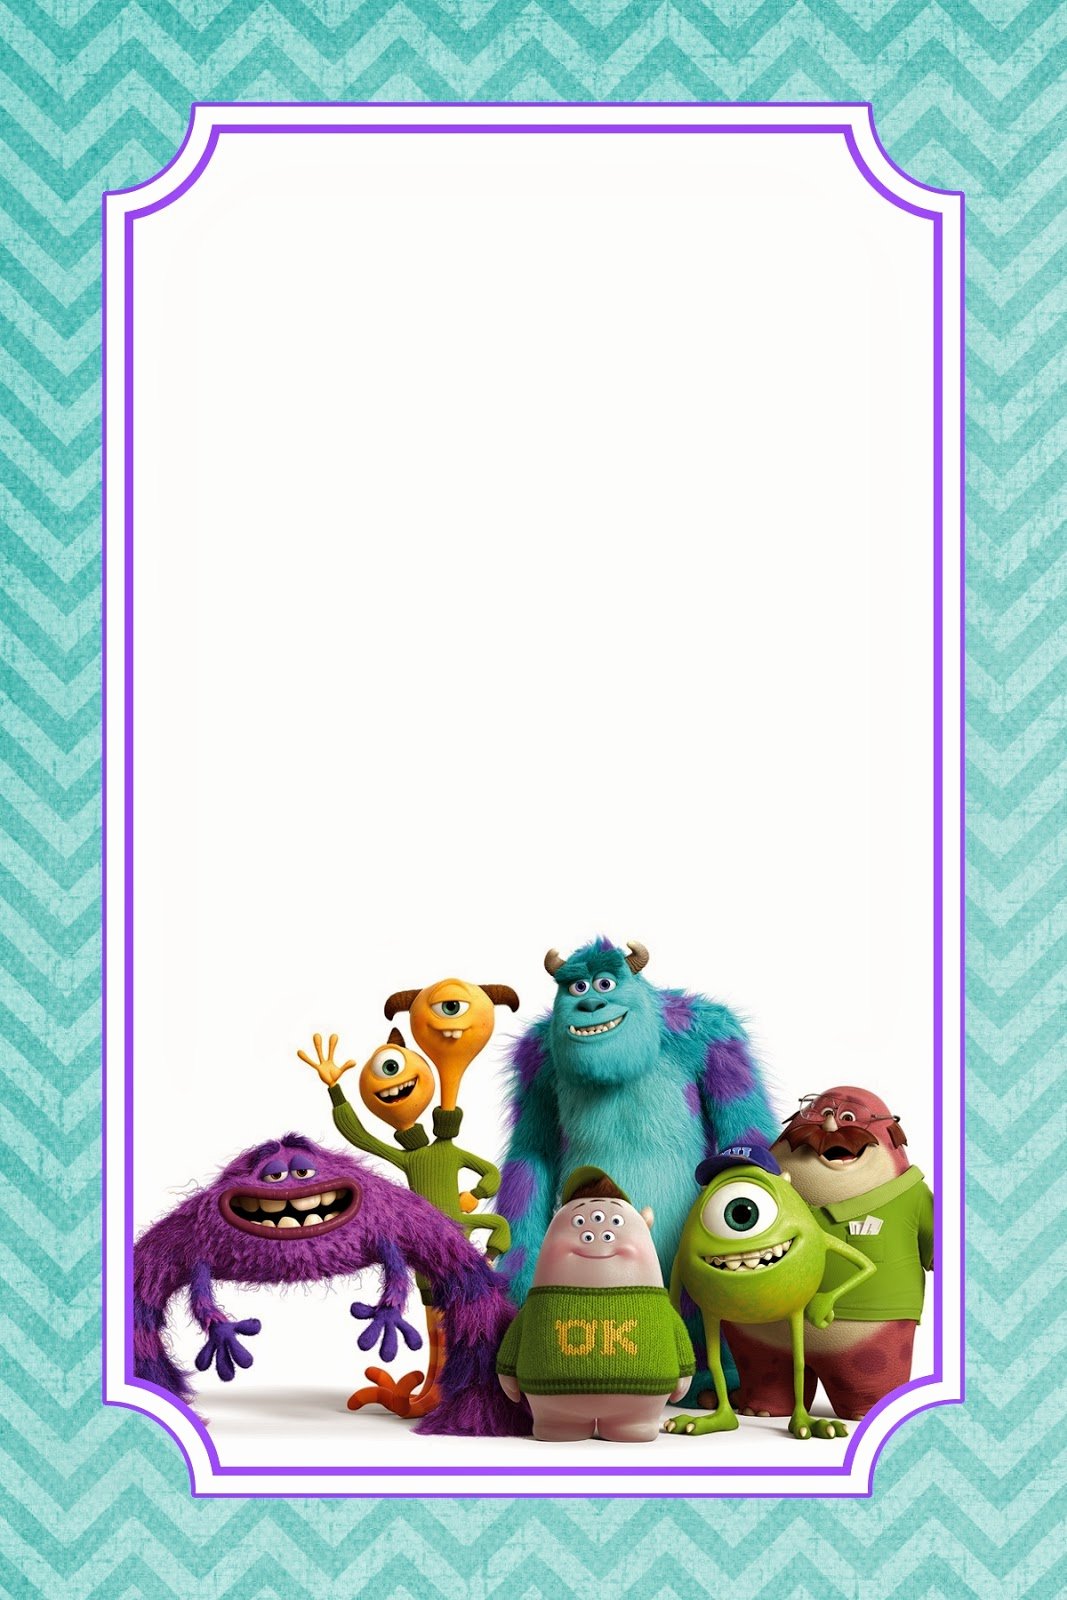 Free Monsters Inc Invitation Template Awesome Appetizer for A Crafty Mind Free Monsters University Food